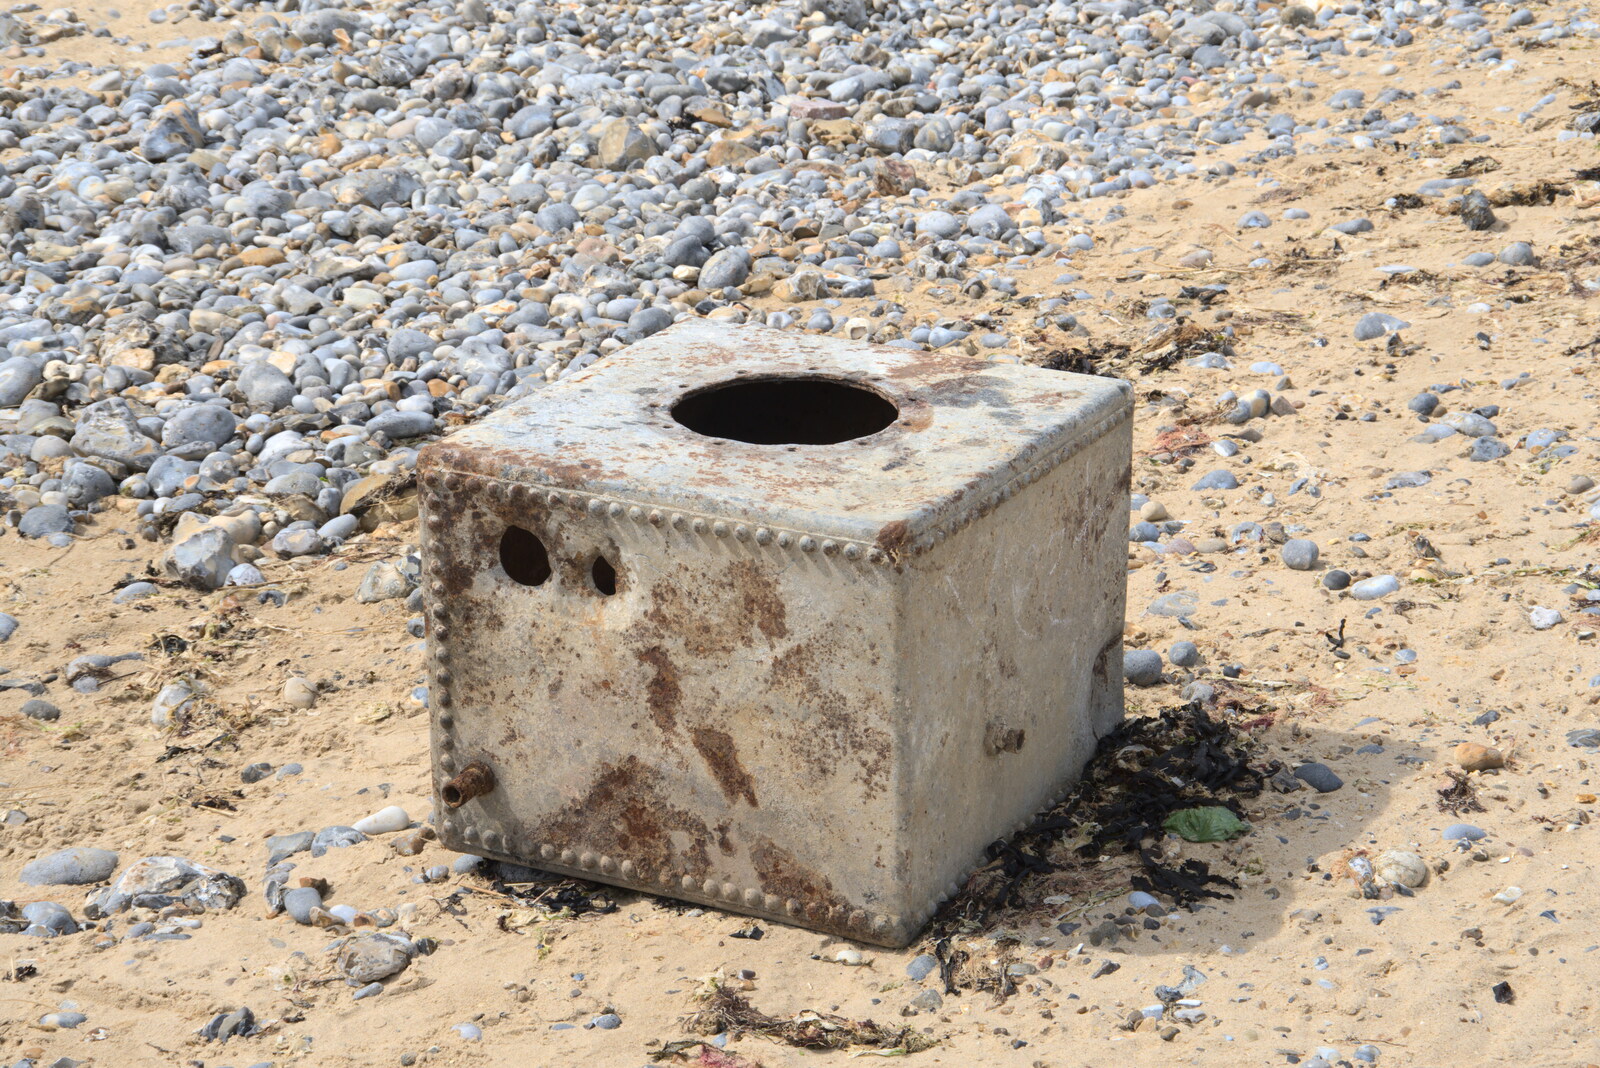 A discarded loft water tank from Camping on the Coast, East Runton, North Norfolk - 25th July 2020